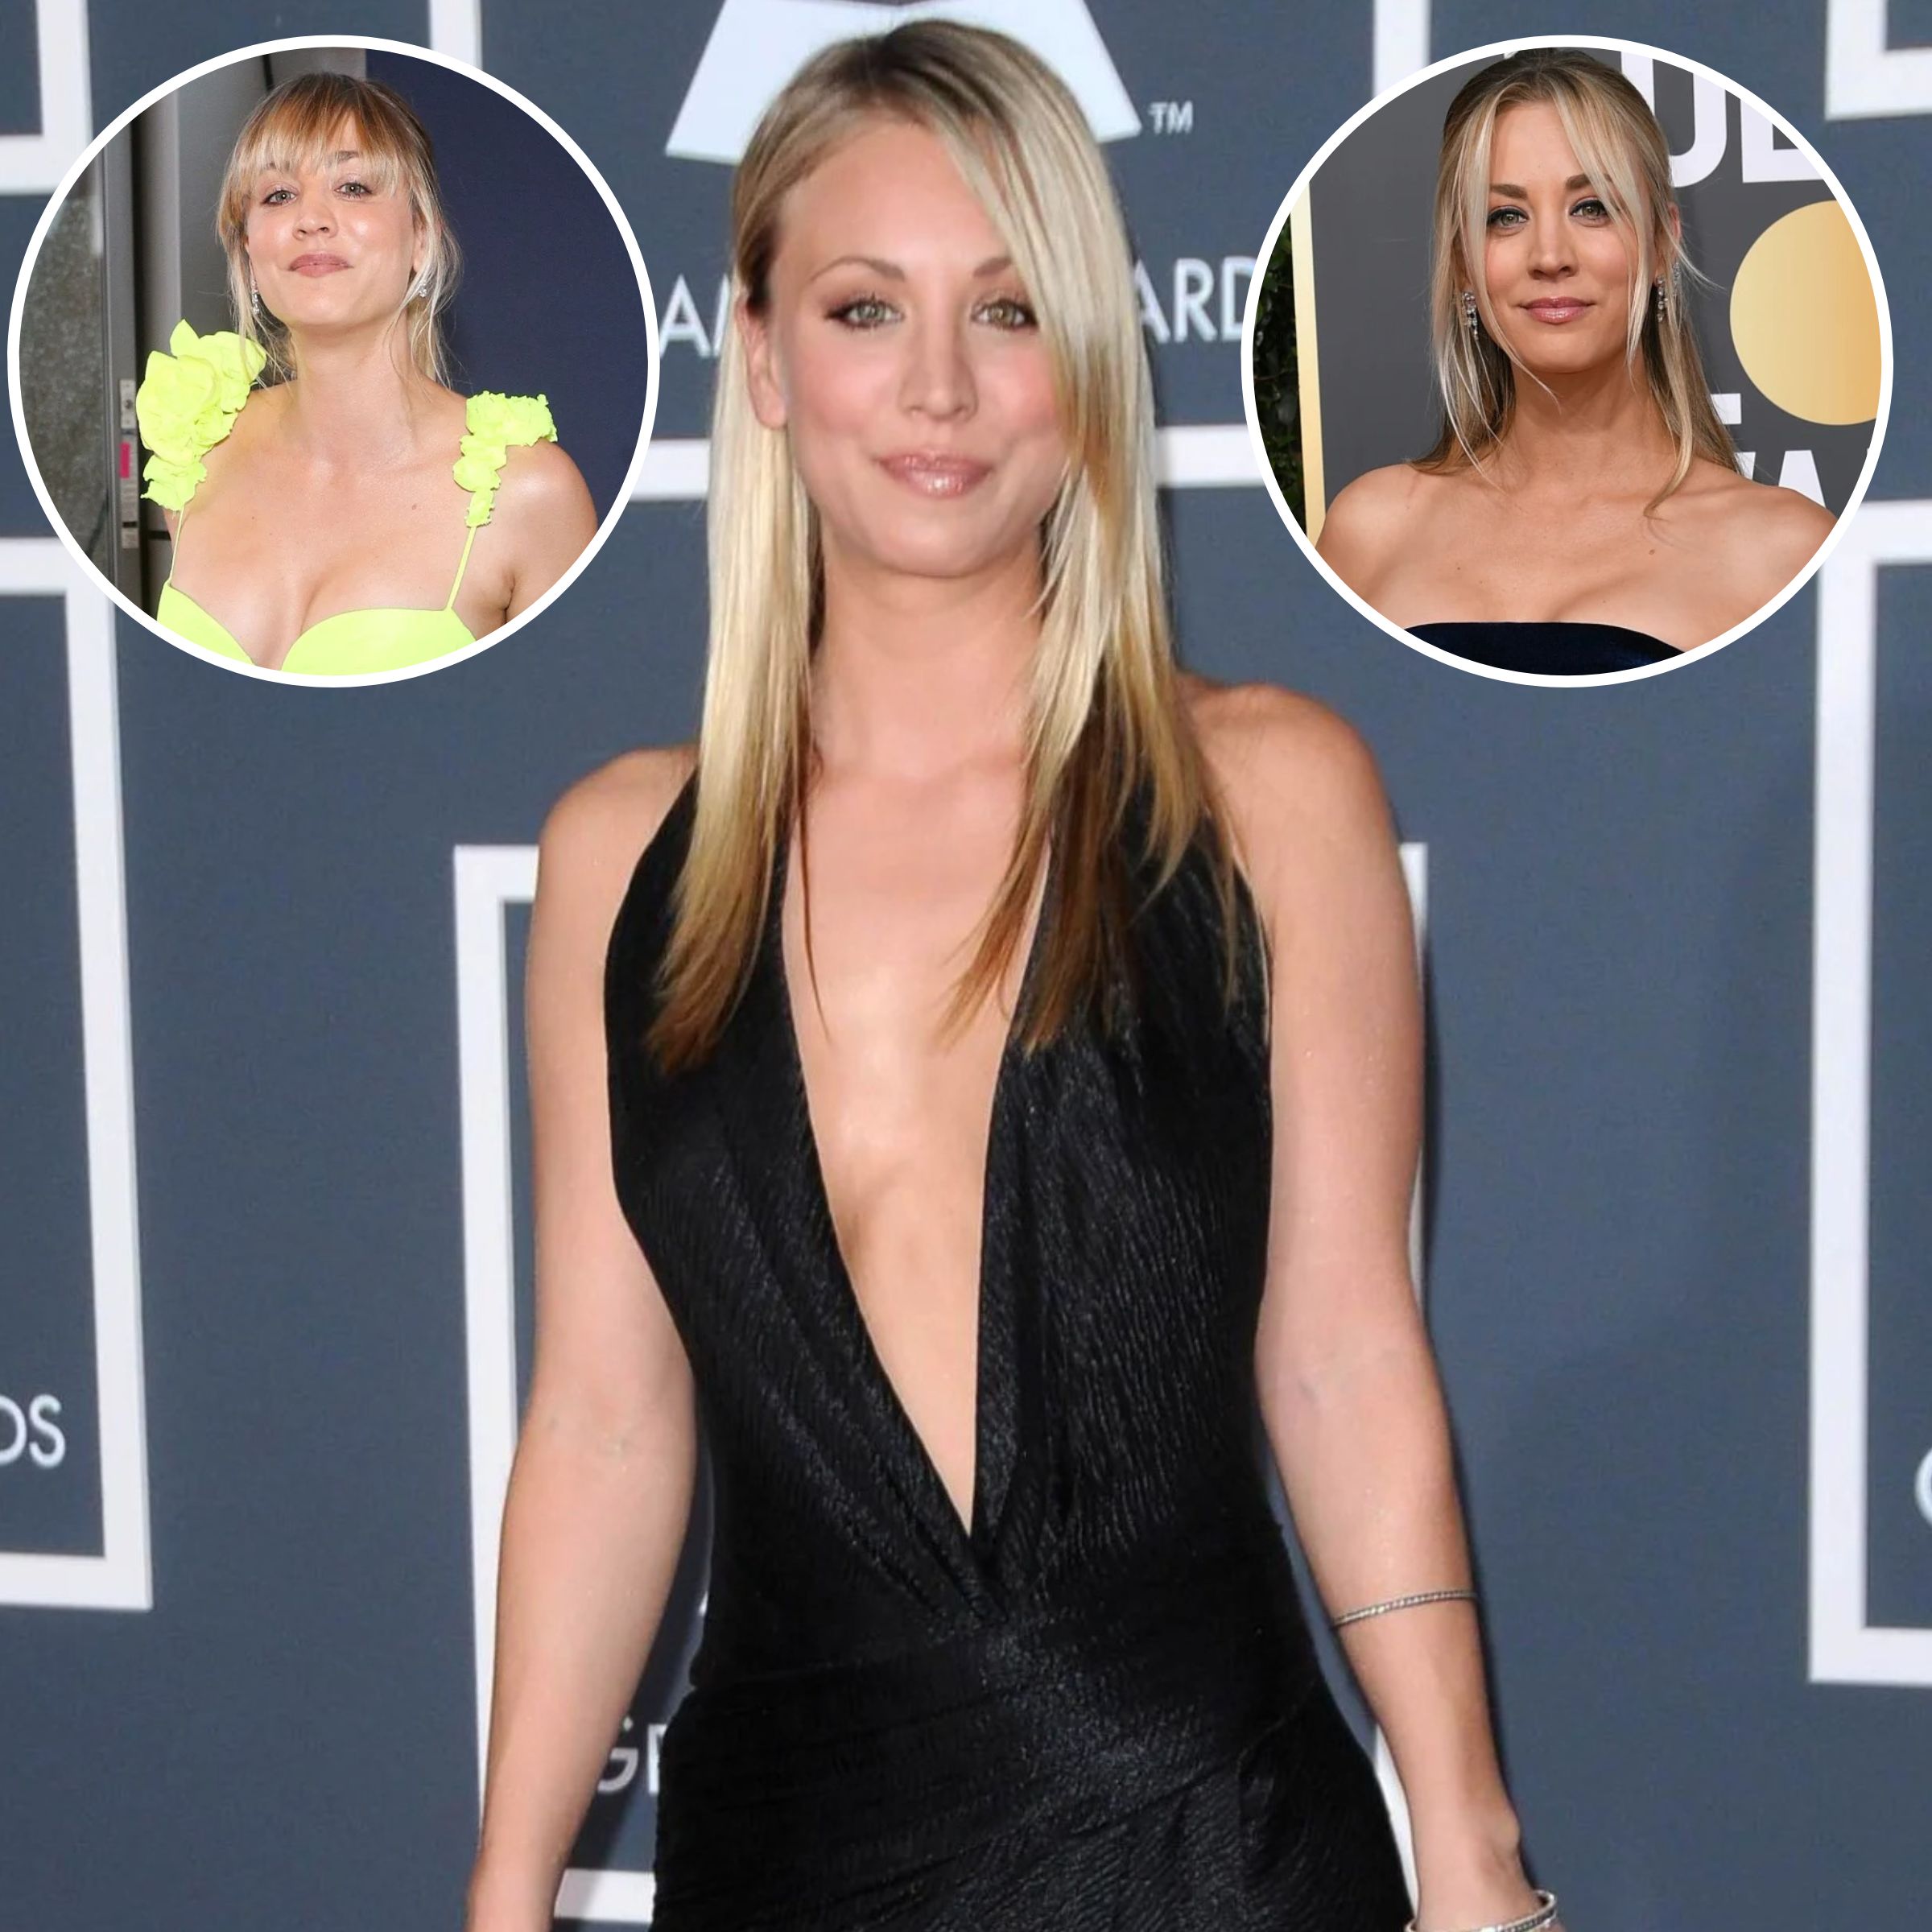 Kayley Cuoco - Kaley Cuoco Braless: Photos of the Actress Without a Bra